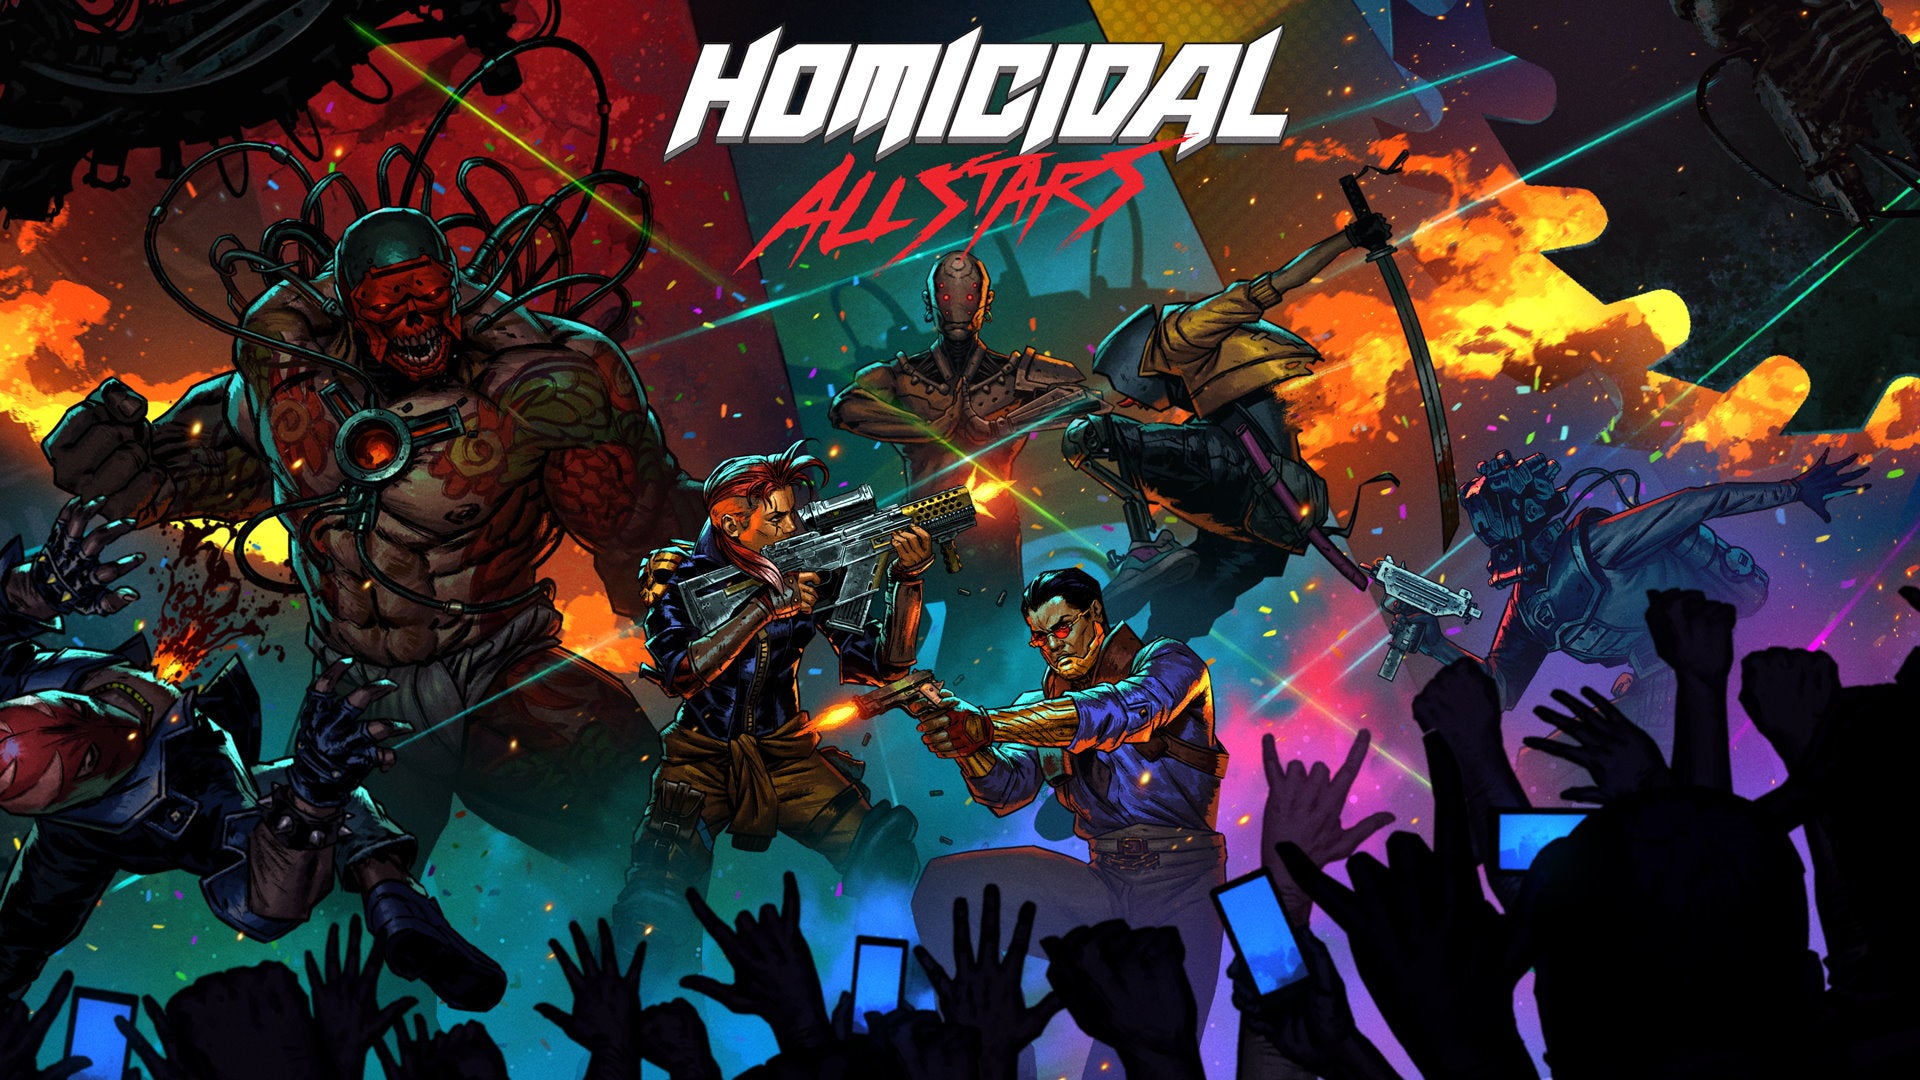 Artwork for Homicidal All-Stars, showing several contestants firing guns in flashy poses